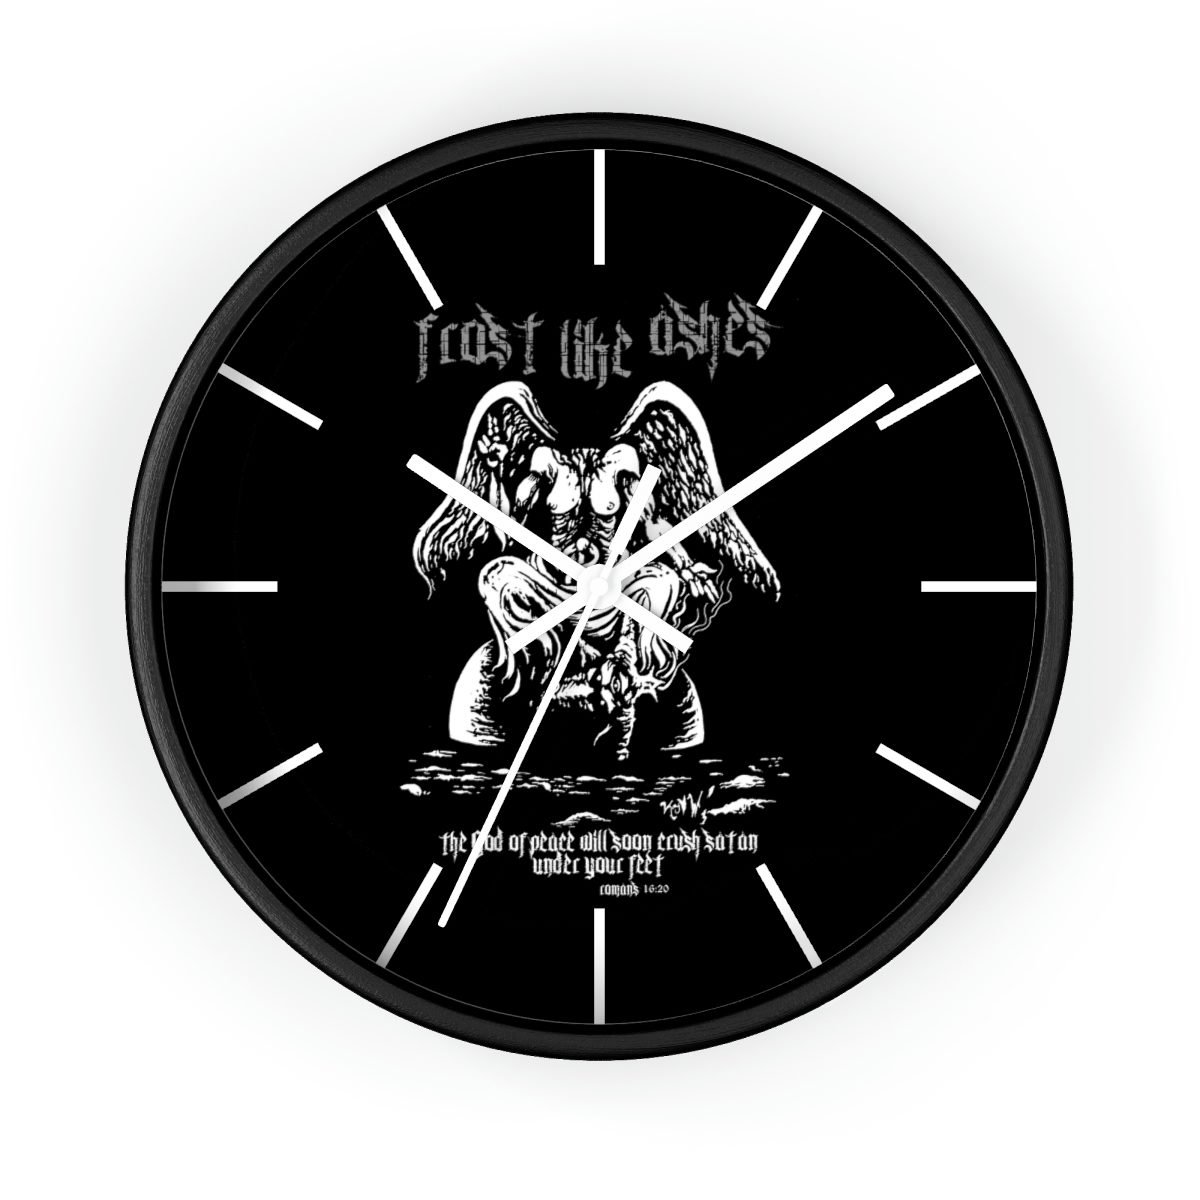 Frost Like Ashes Desecrated Baphomet Wall clock